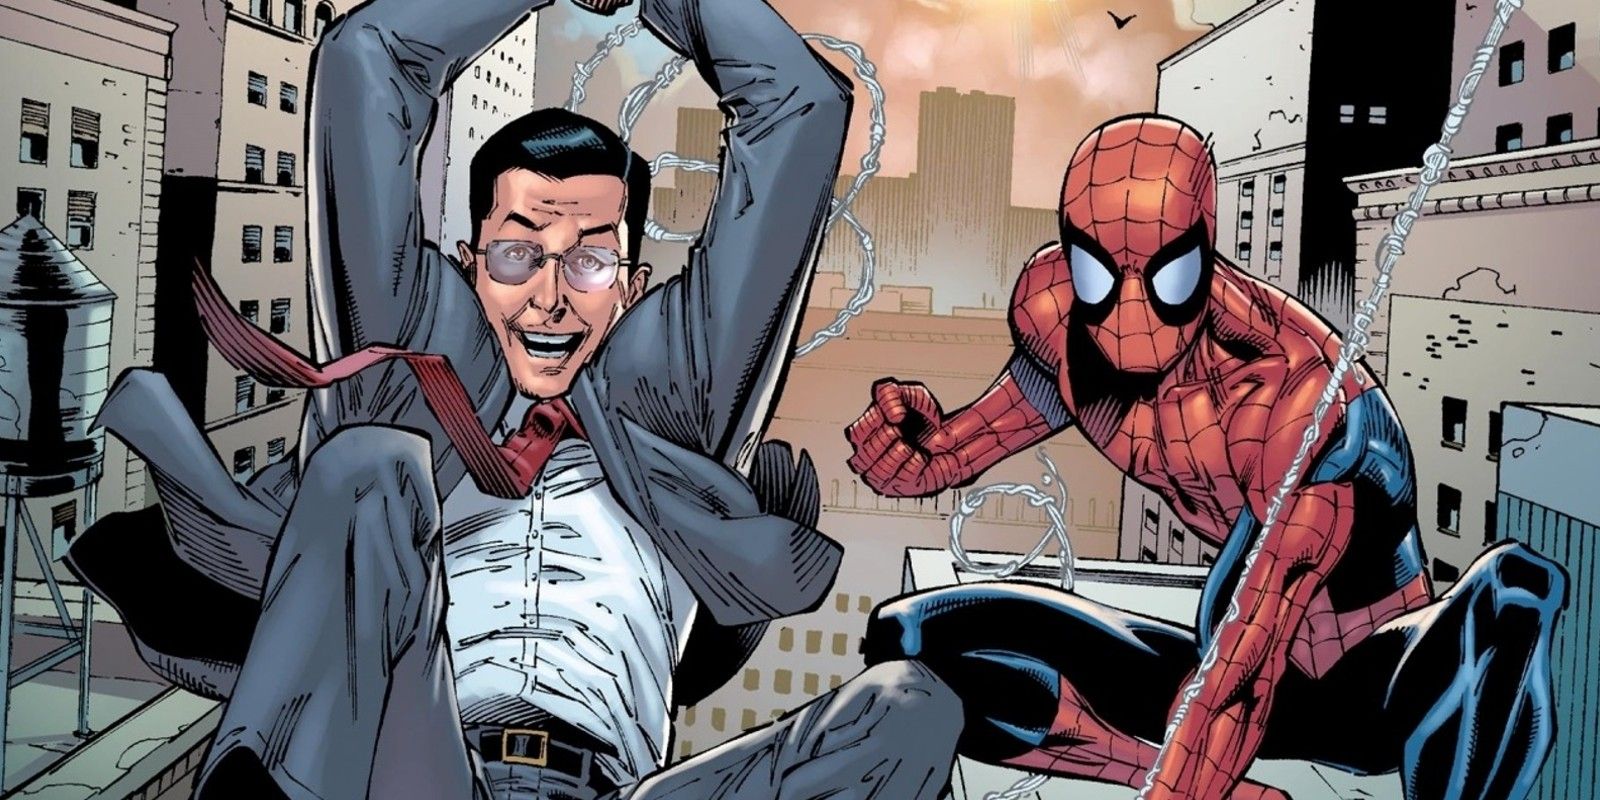 Stephen Colbert teamed up with Spider-Man